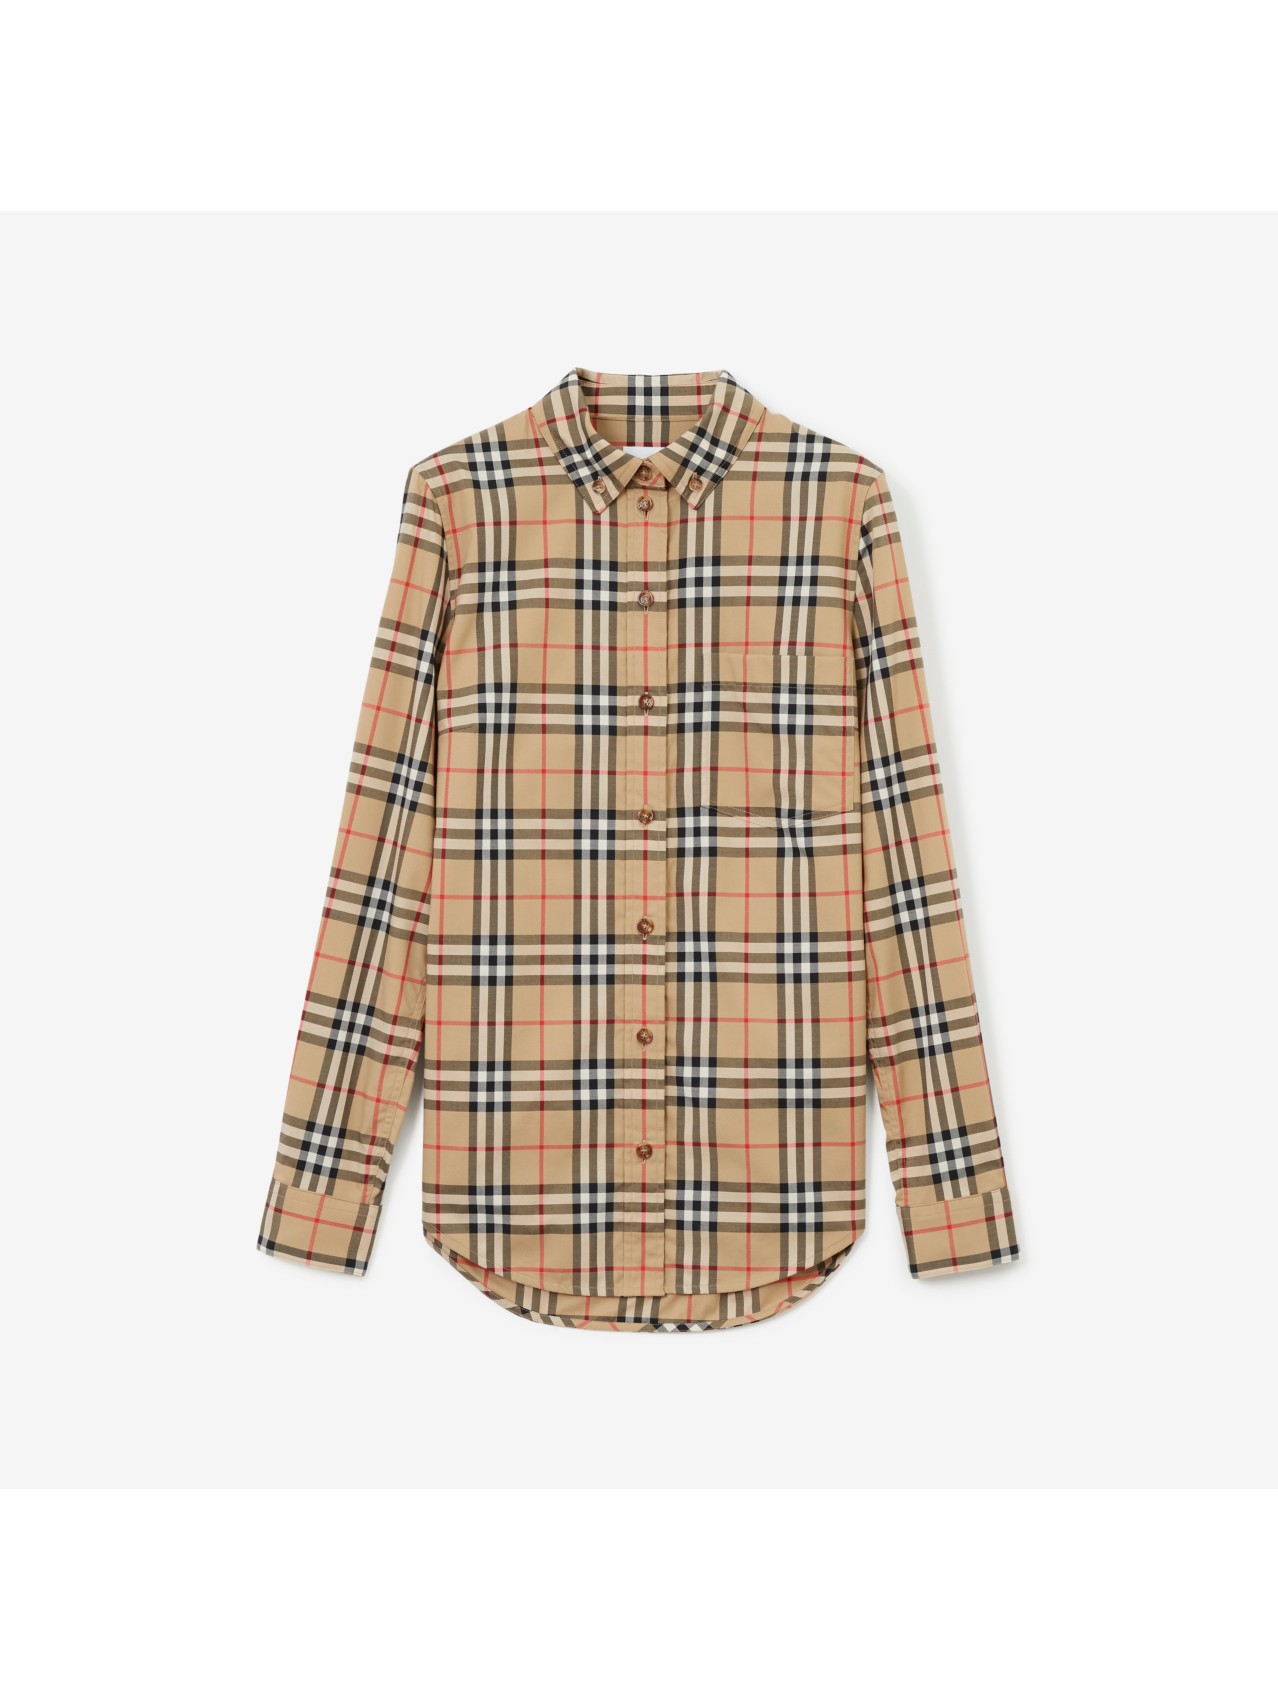 Designer Shirts & Tops for Women | Burberry® Official